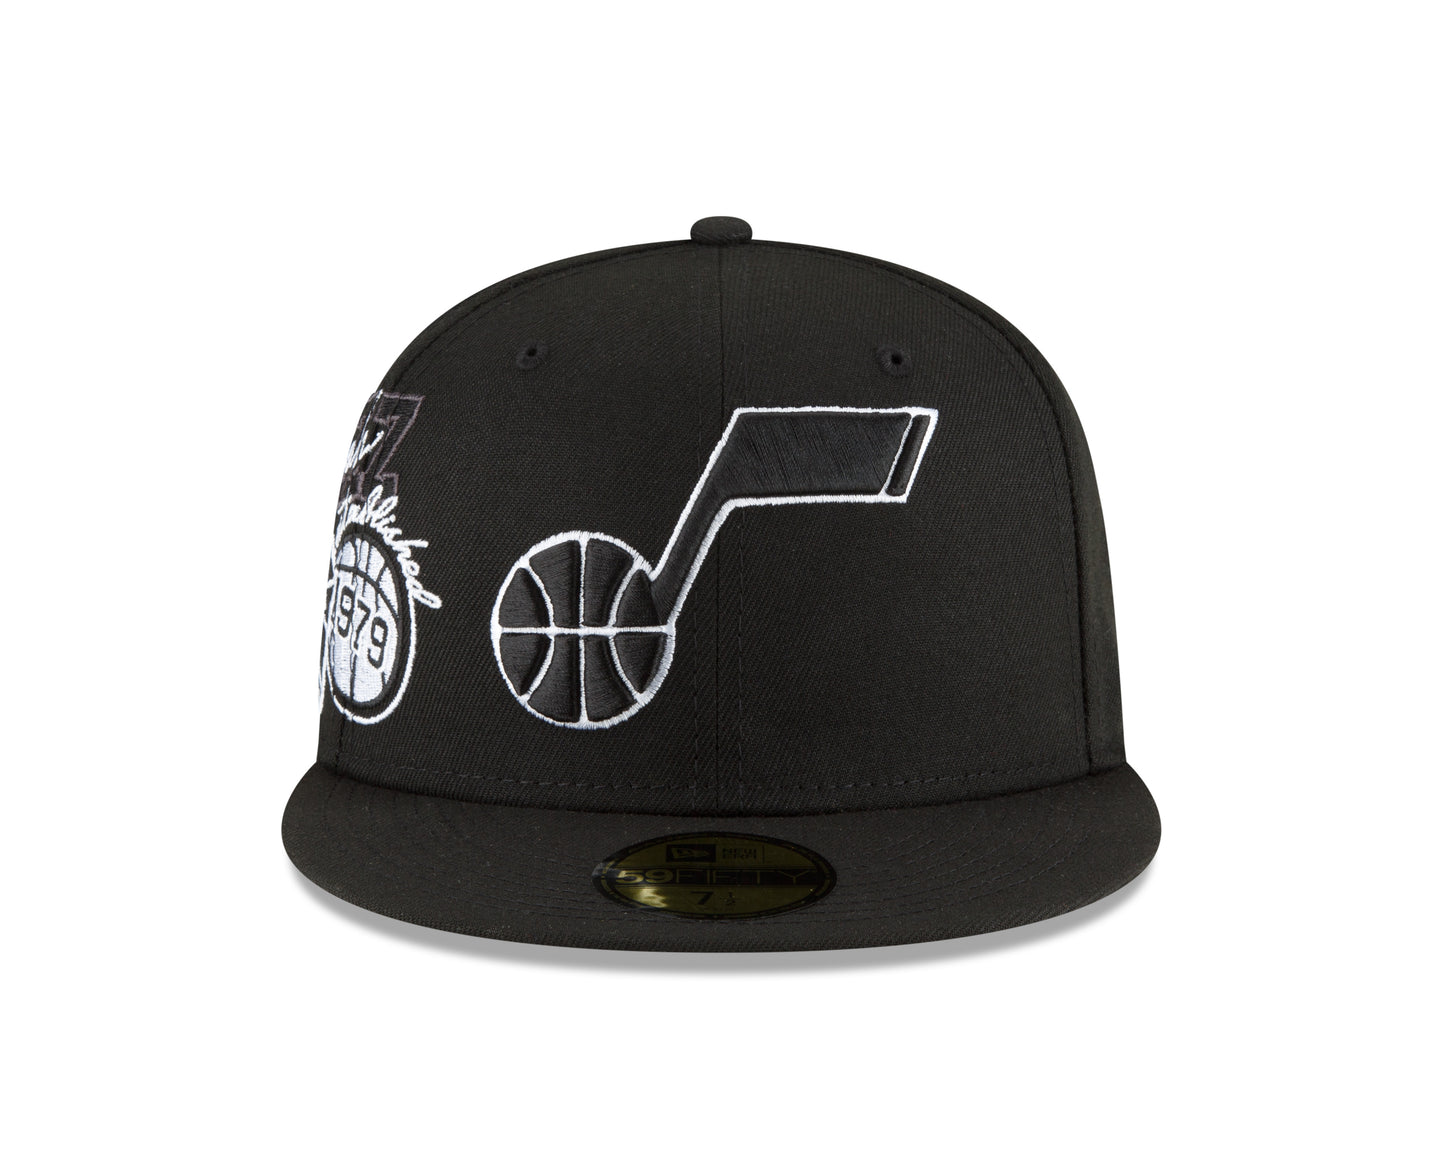 Utah Jazz New Era Black and White Back Half 59fifty Fitted Hat